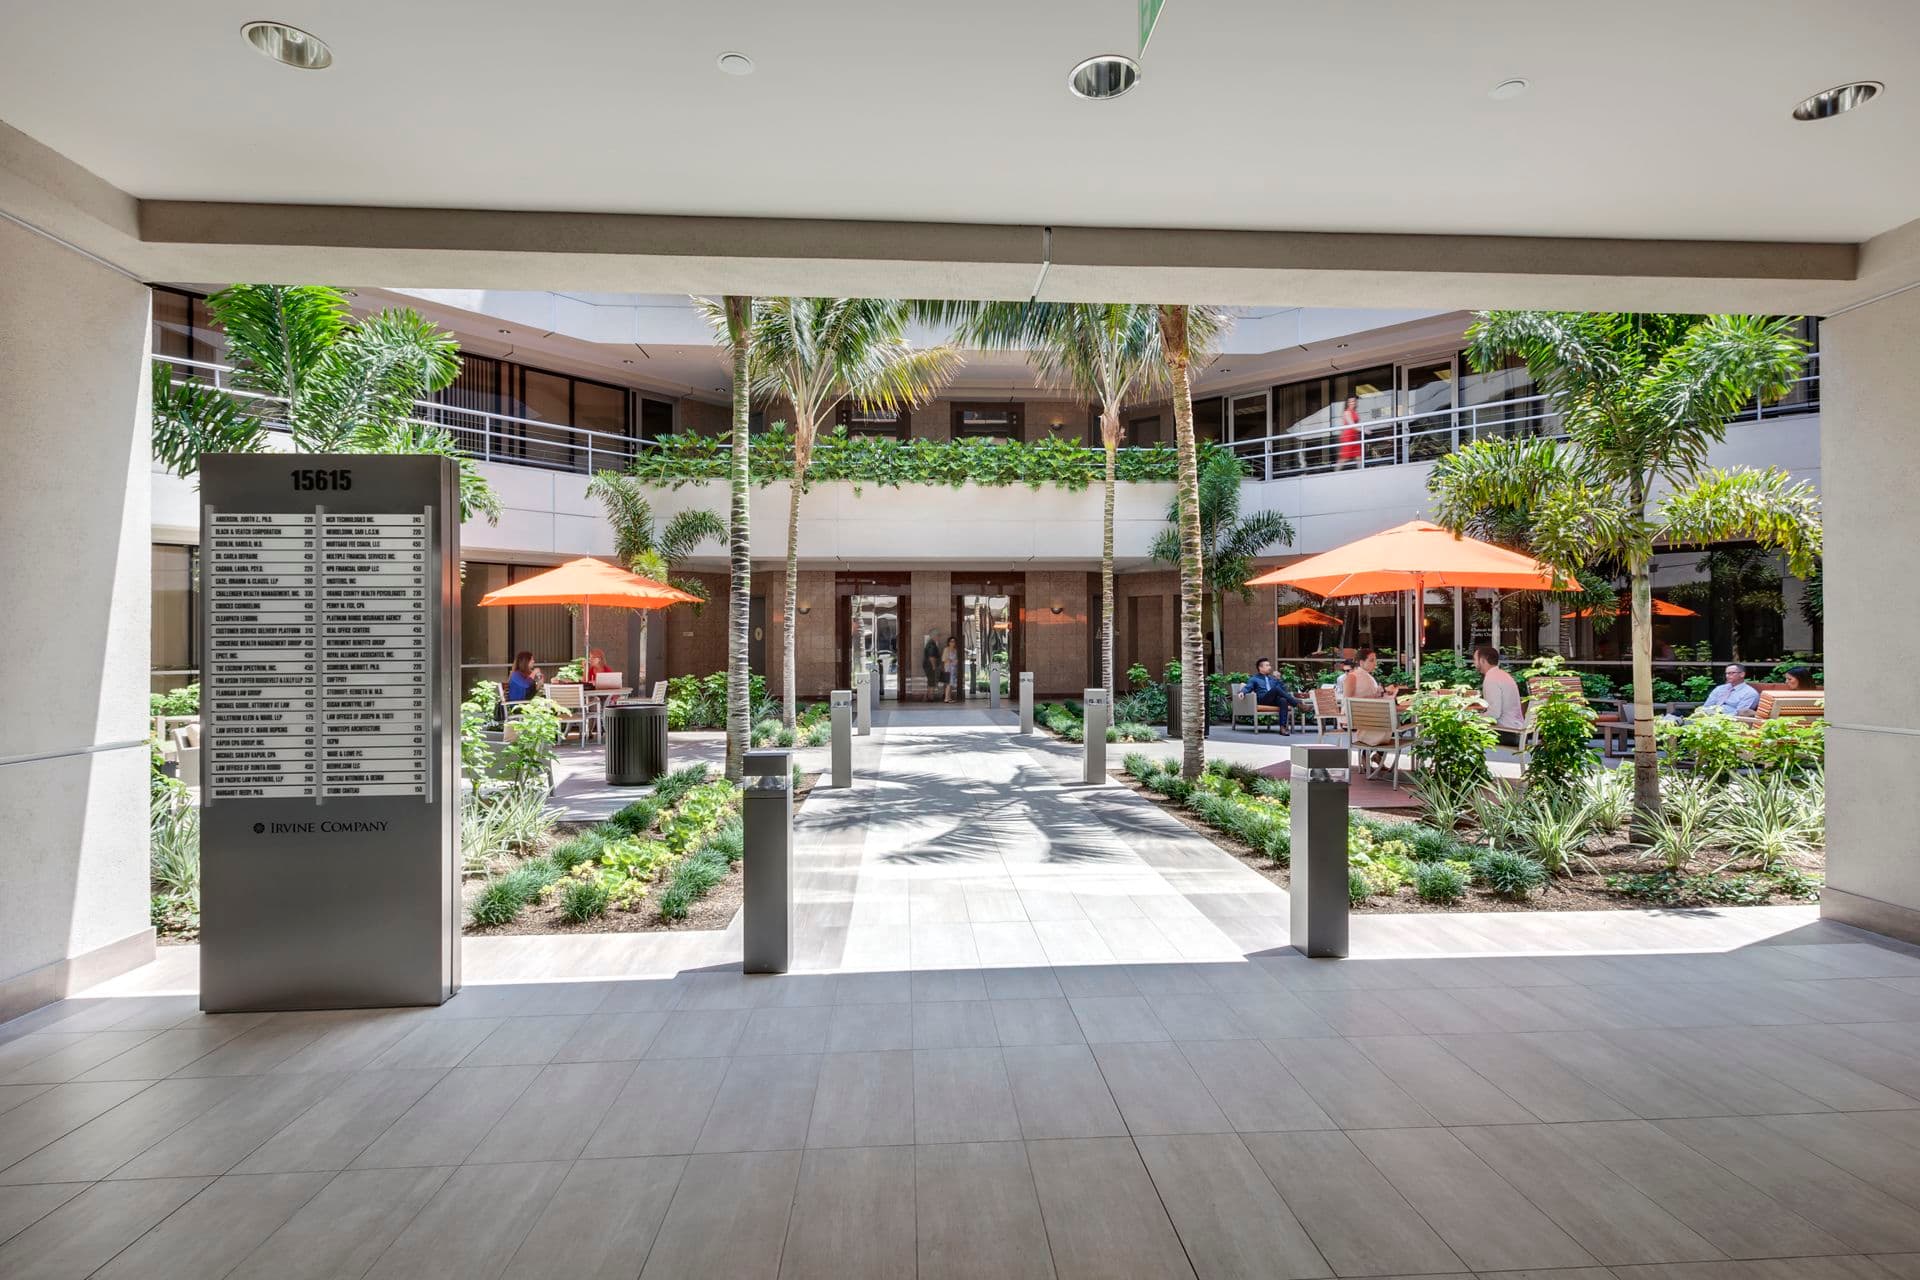 Exterior view of the outdoor workspace at Spectrum Court in Irvine, CA.